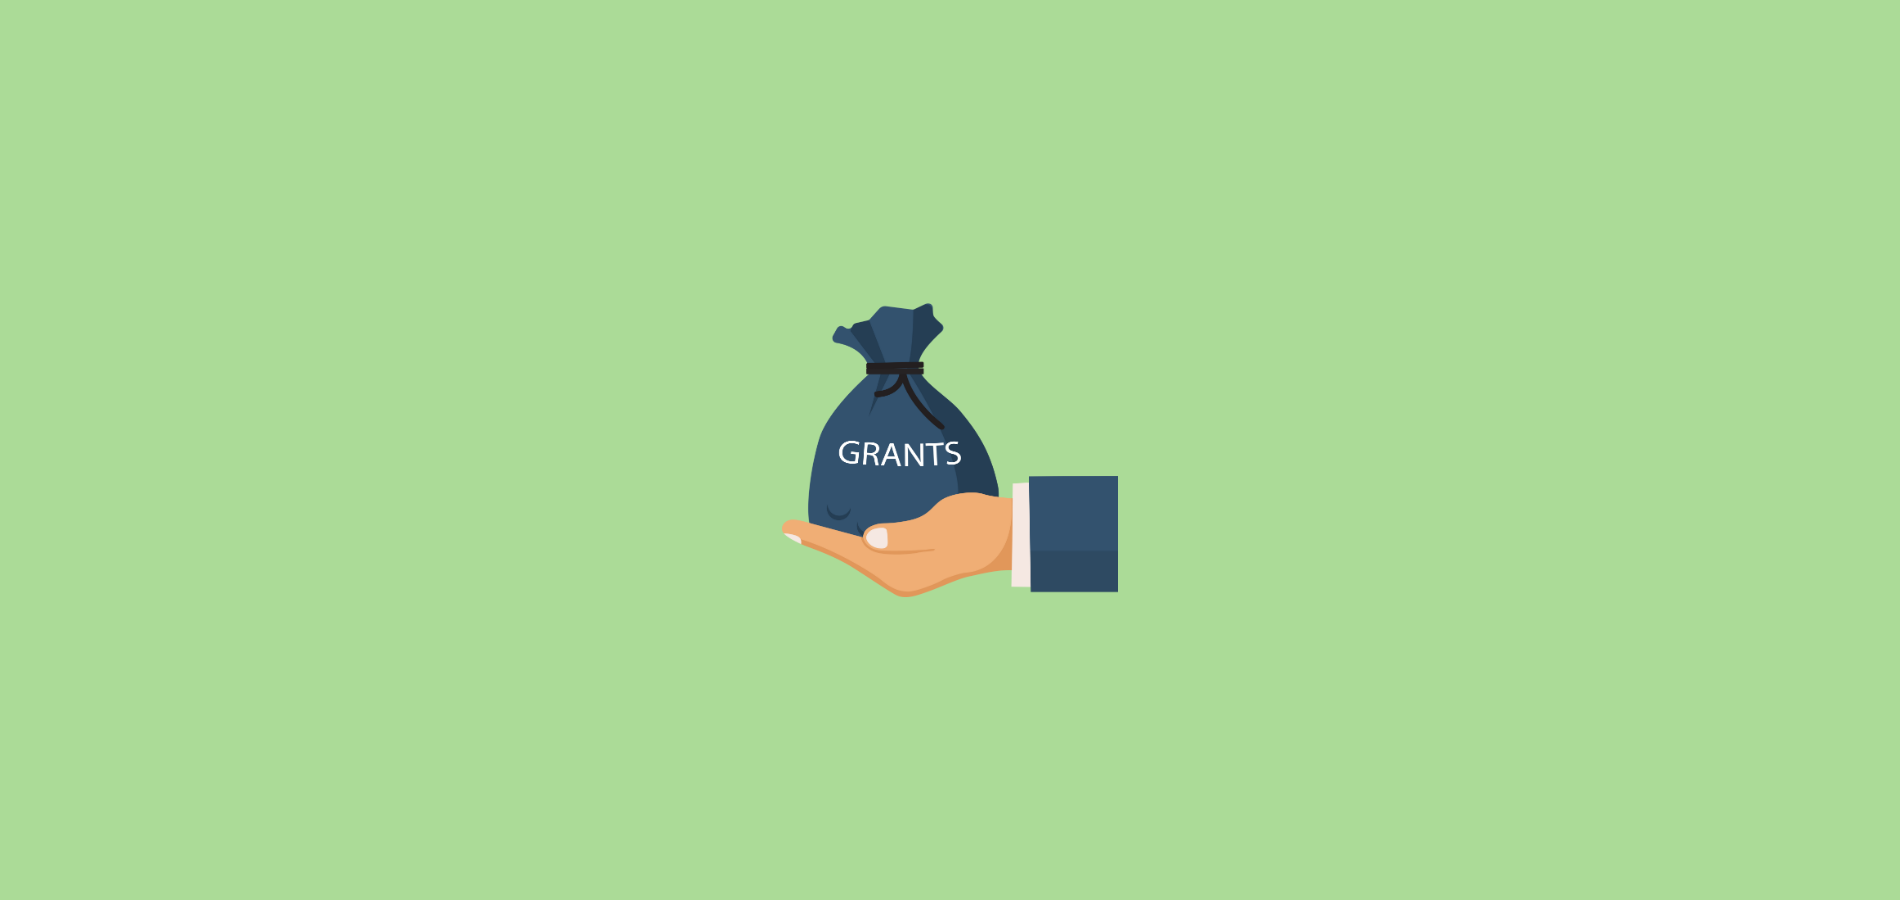 Small business grants available in Canada and how to apply for them